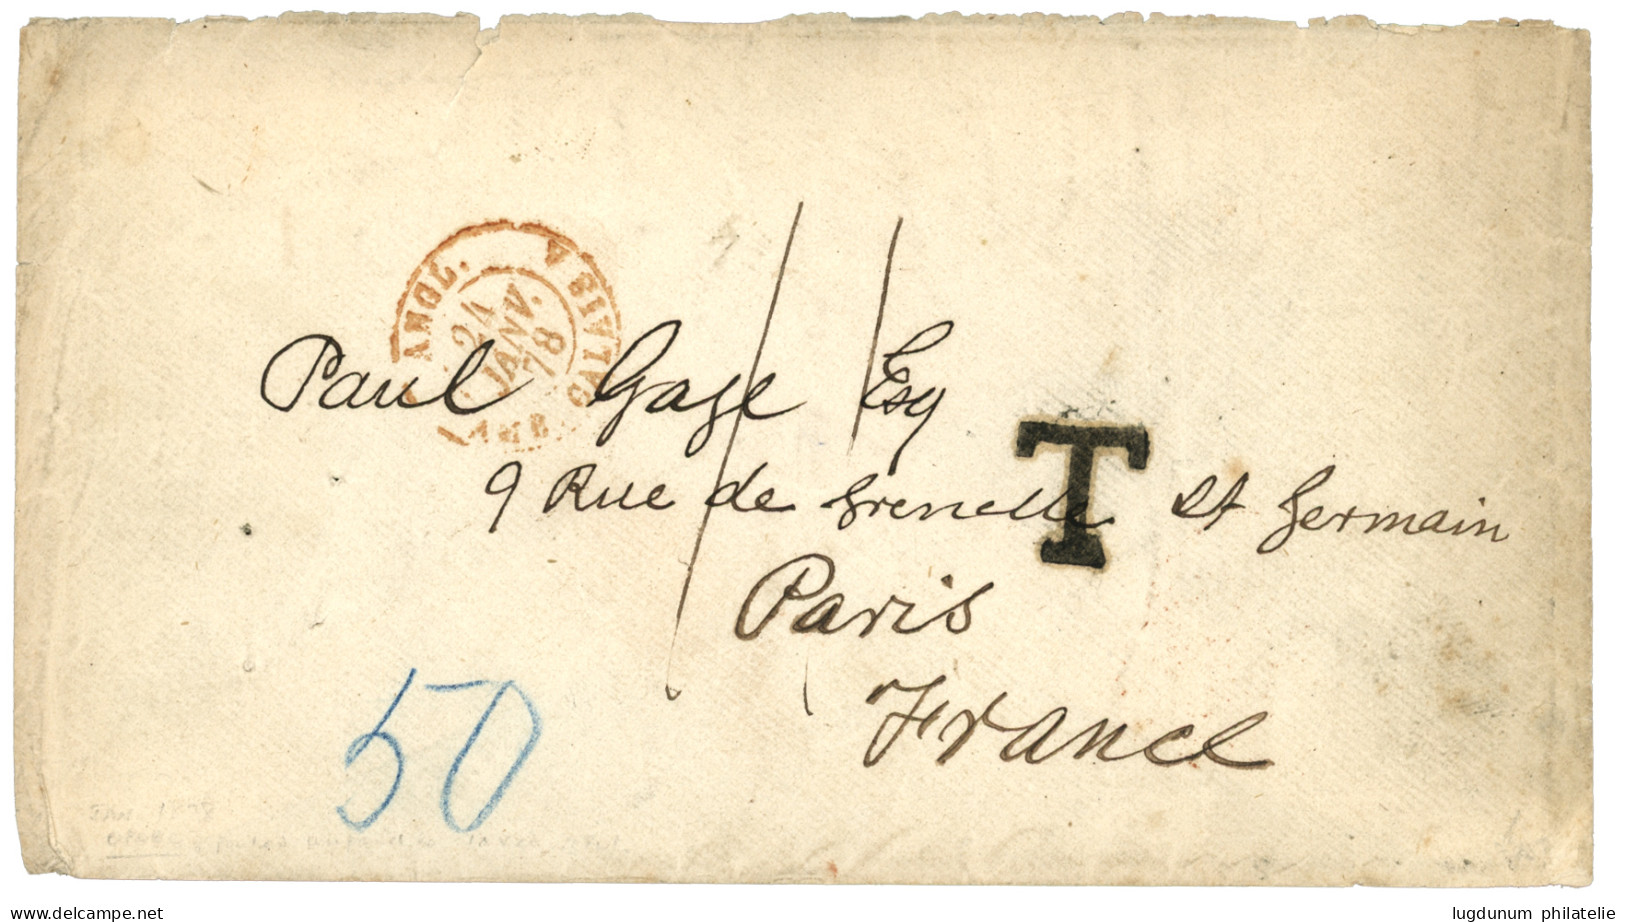 GOLD COAST - OPOBO : 1878 T + "11" Tax Marking On Envelope "JOSEPH GOODING SIERRA LEONE" + "OPOBO" To FRANCE. SCarce. Vf - Côte D'Or (...-1957)